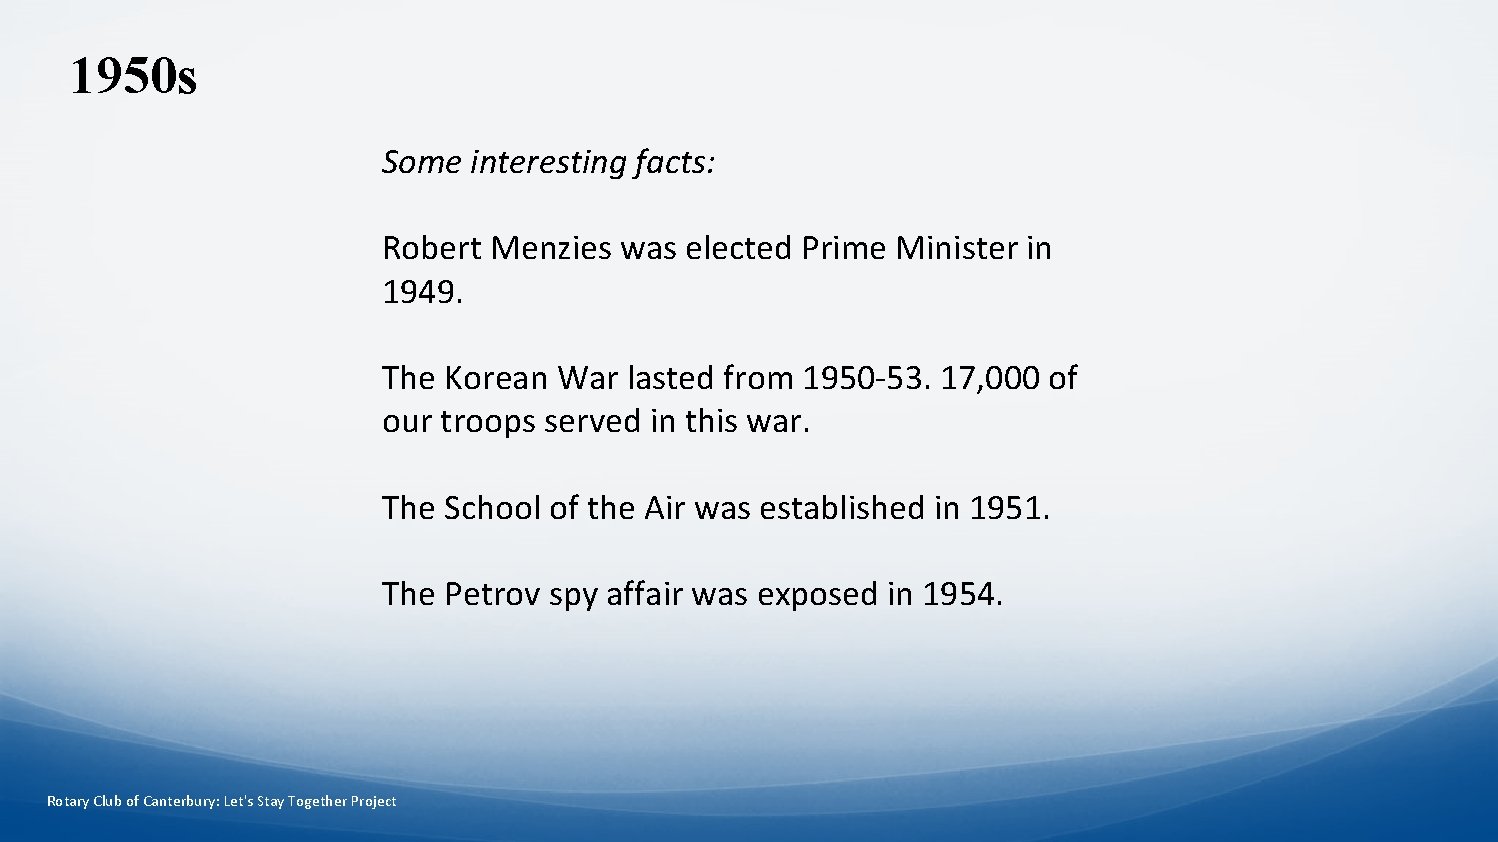 1950 s Some interesting facts: Robert Menzies was elected Prime Minister in 1949. The